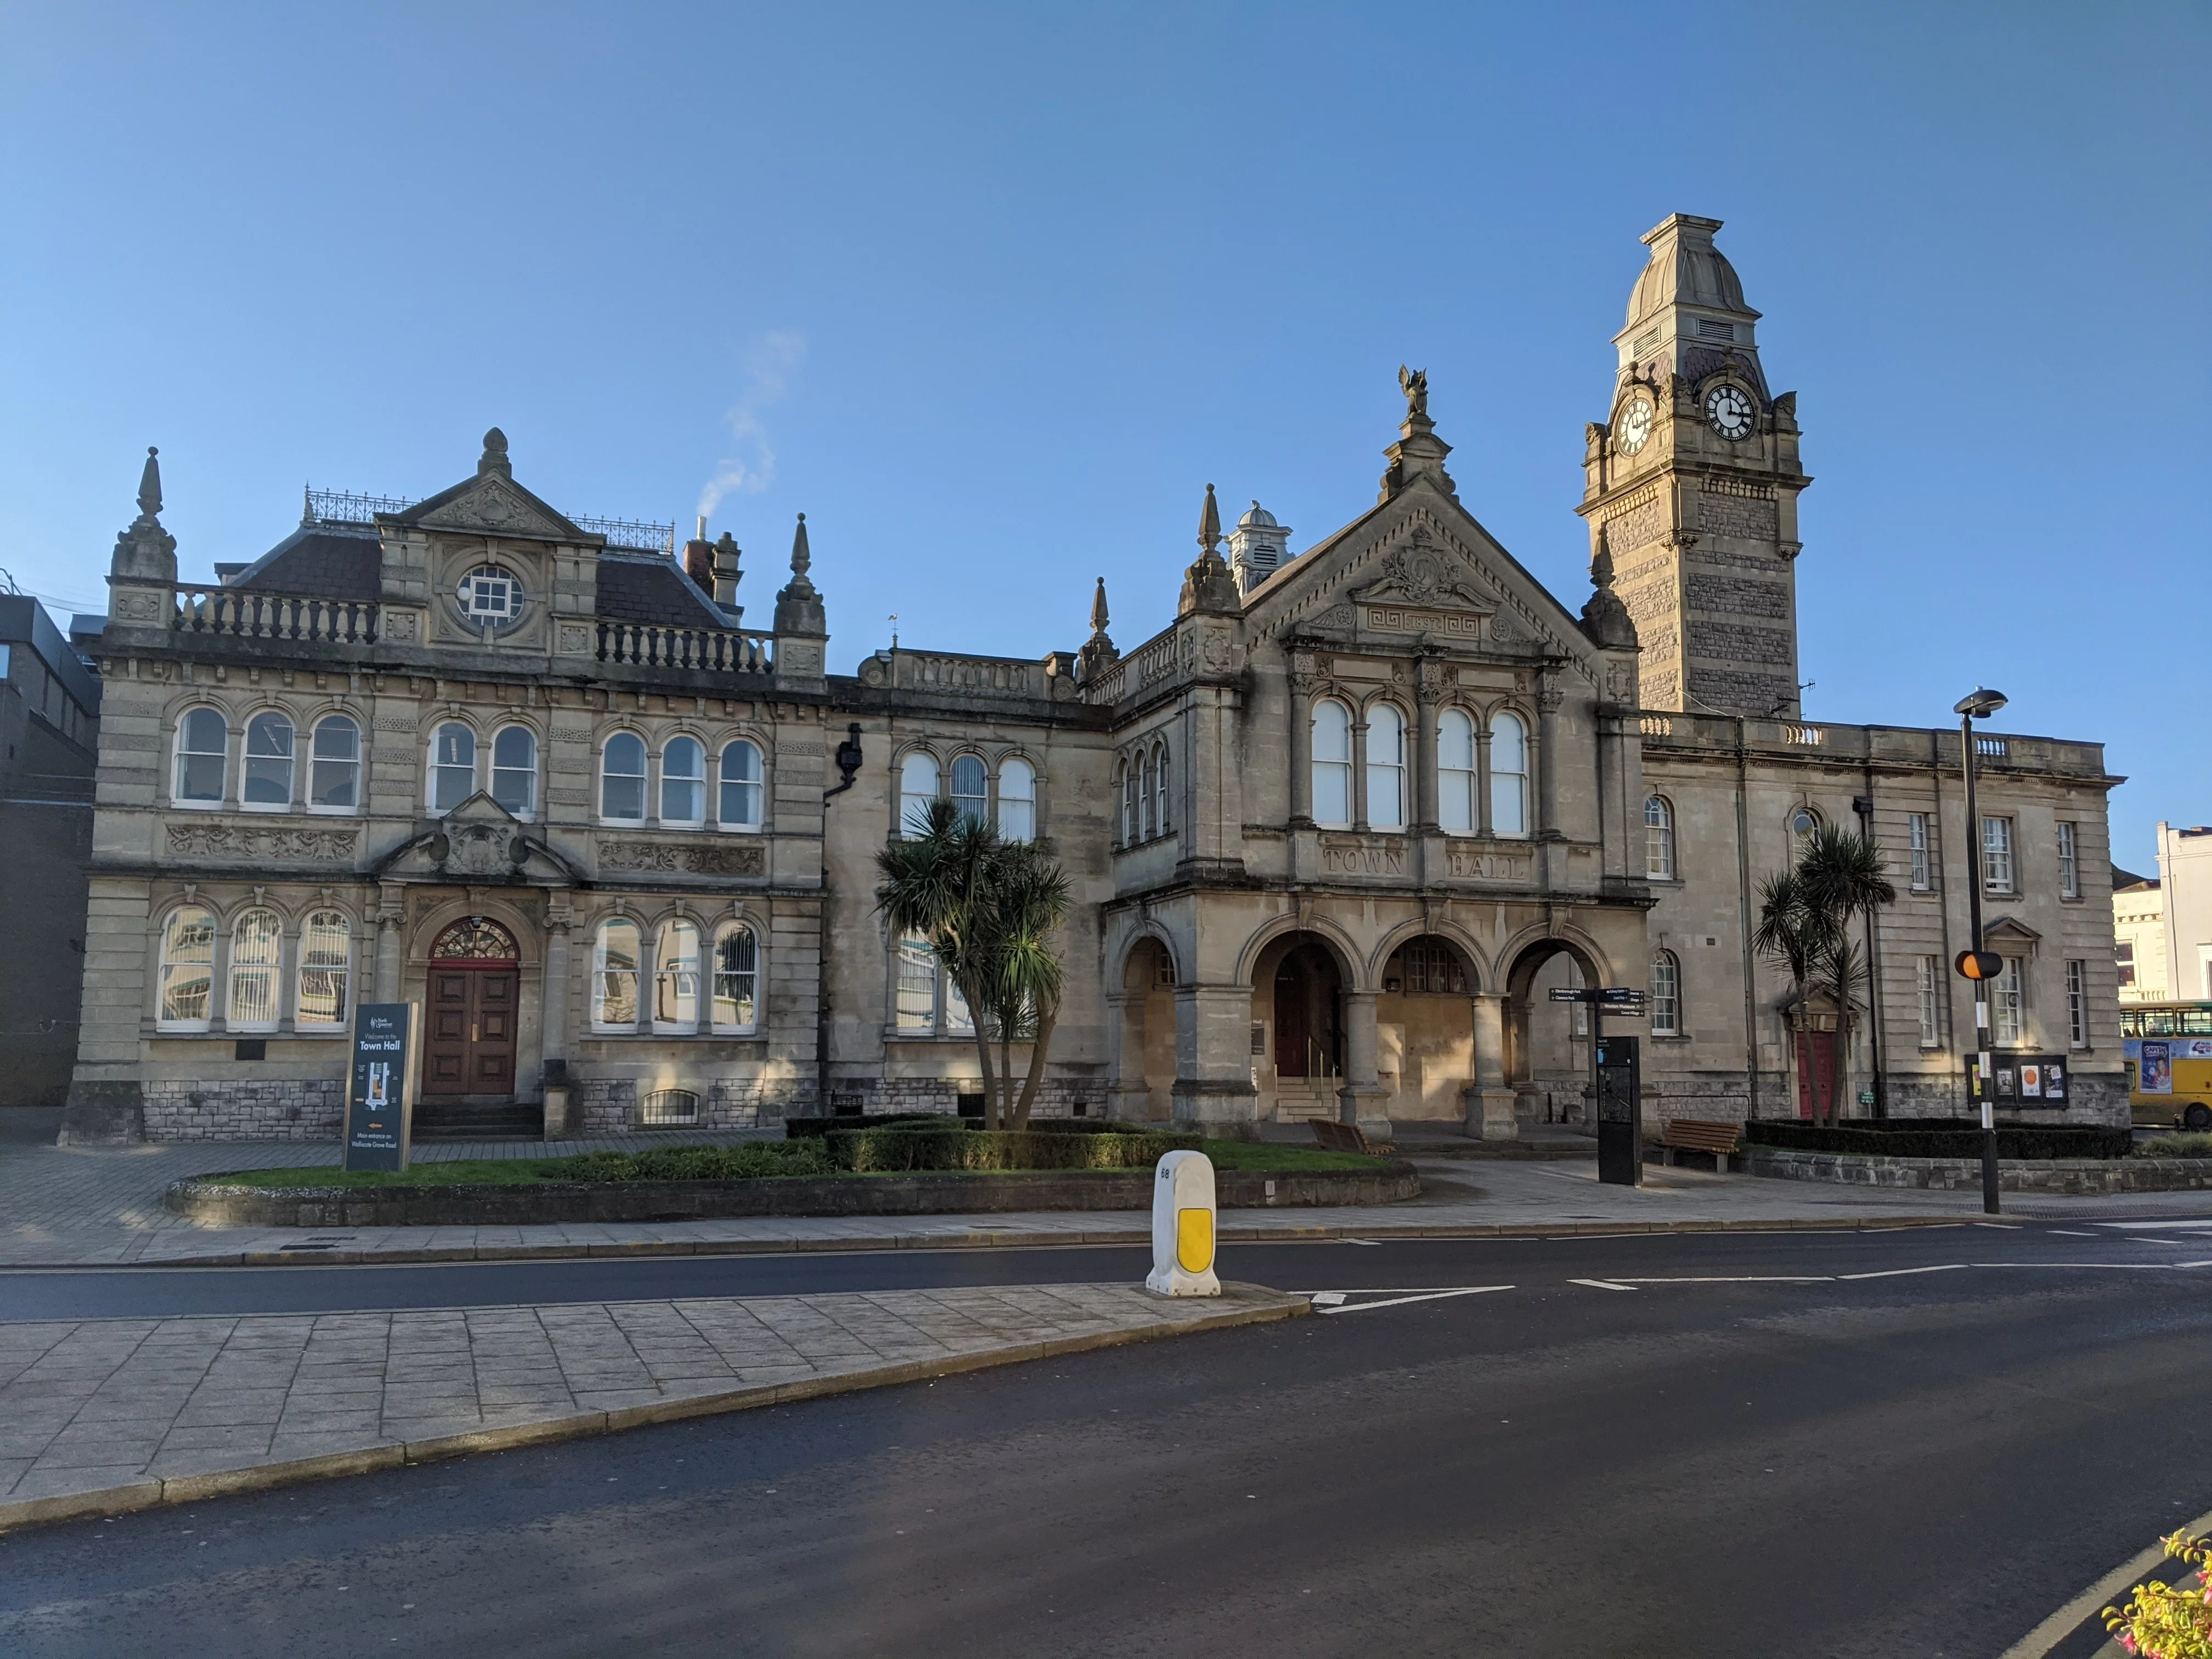 A photo of the Town Hall in Weston-super-Mare.